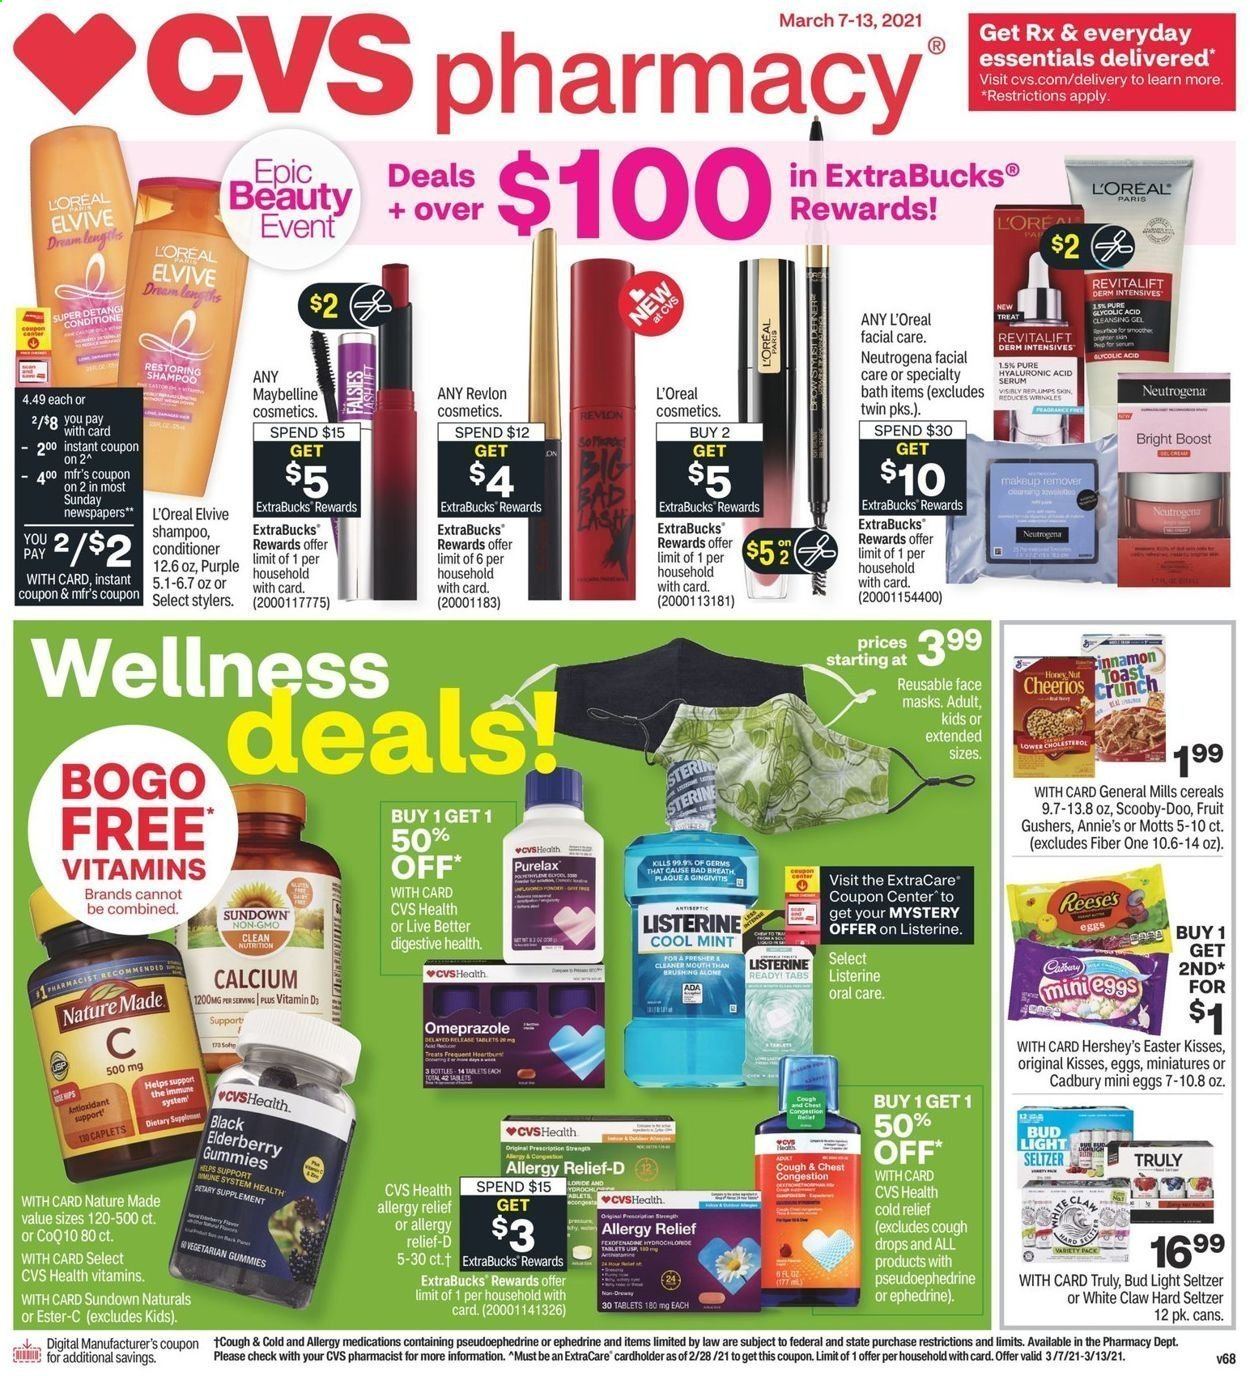 thumbnail - CVS Pharmacy Flyer - 03/07/2021 - 03/13/2021 - Sales products - Annie's, Reese's, Hershey's, Cadbury, Digestive, cereals, Cheerios, Fiber One, Mott's, seltzer water, Boost, White Claw, Hard Seltzer, TRULY, shampoo, Listerine, Purelax, L’Oréal, Neutrogena, serum, conditioner, Revlon, makeup remover, Maybelline, calcium, Ester-c, Nature Made, Sundown Naturals, cough drops, allergy relief, face mask, beer, Bud Light, makeup. Page 1.